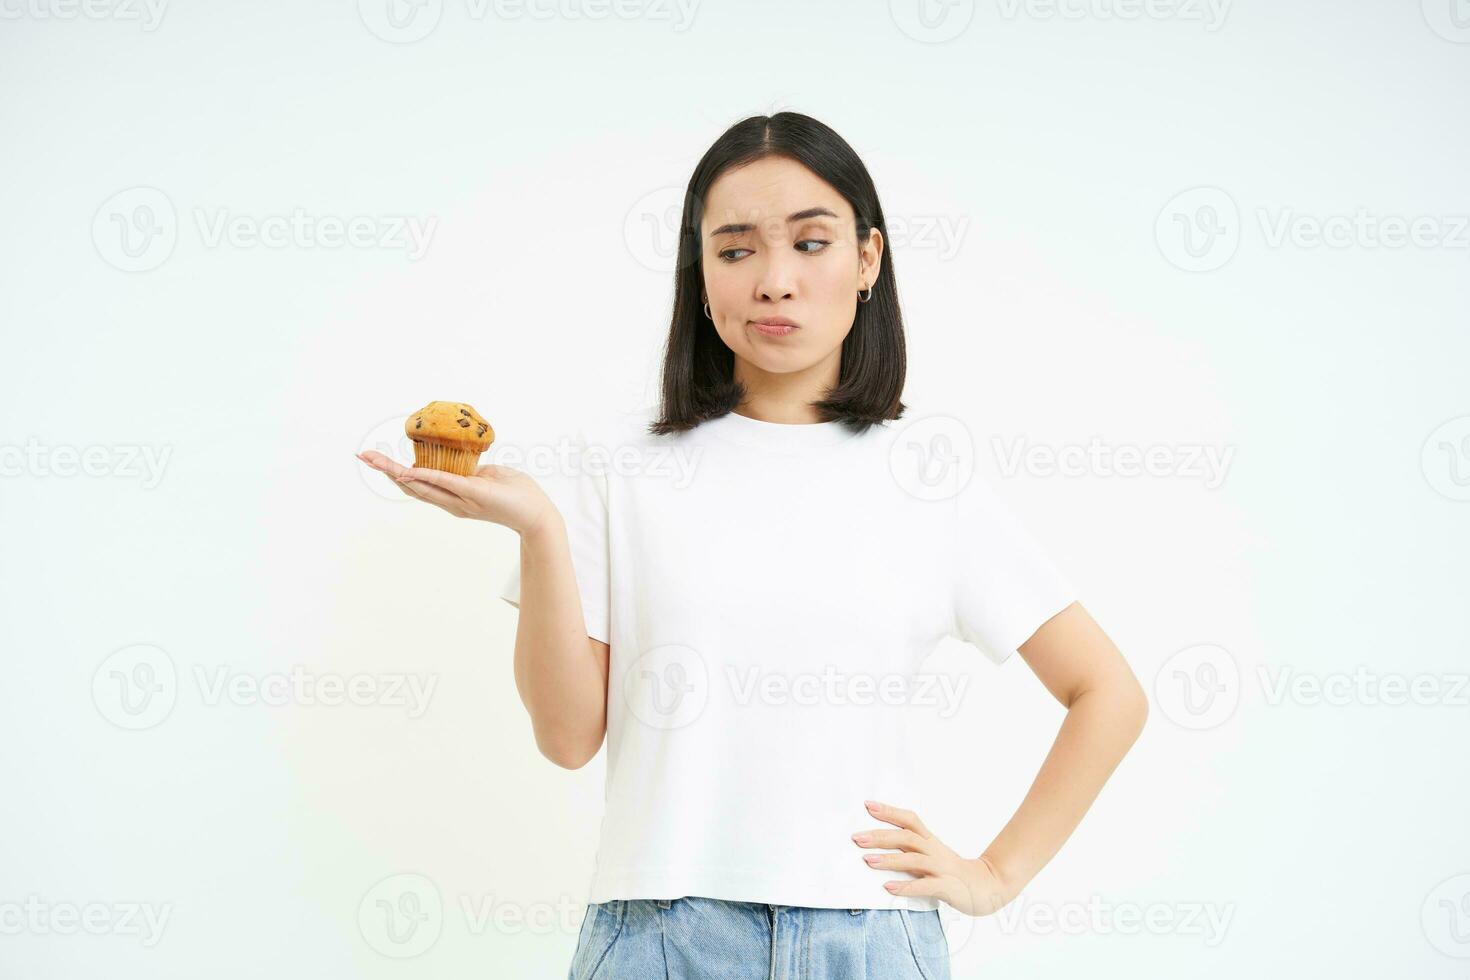 Image of korean girl, looking at cupcake and thinking, making decision, white background photo